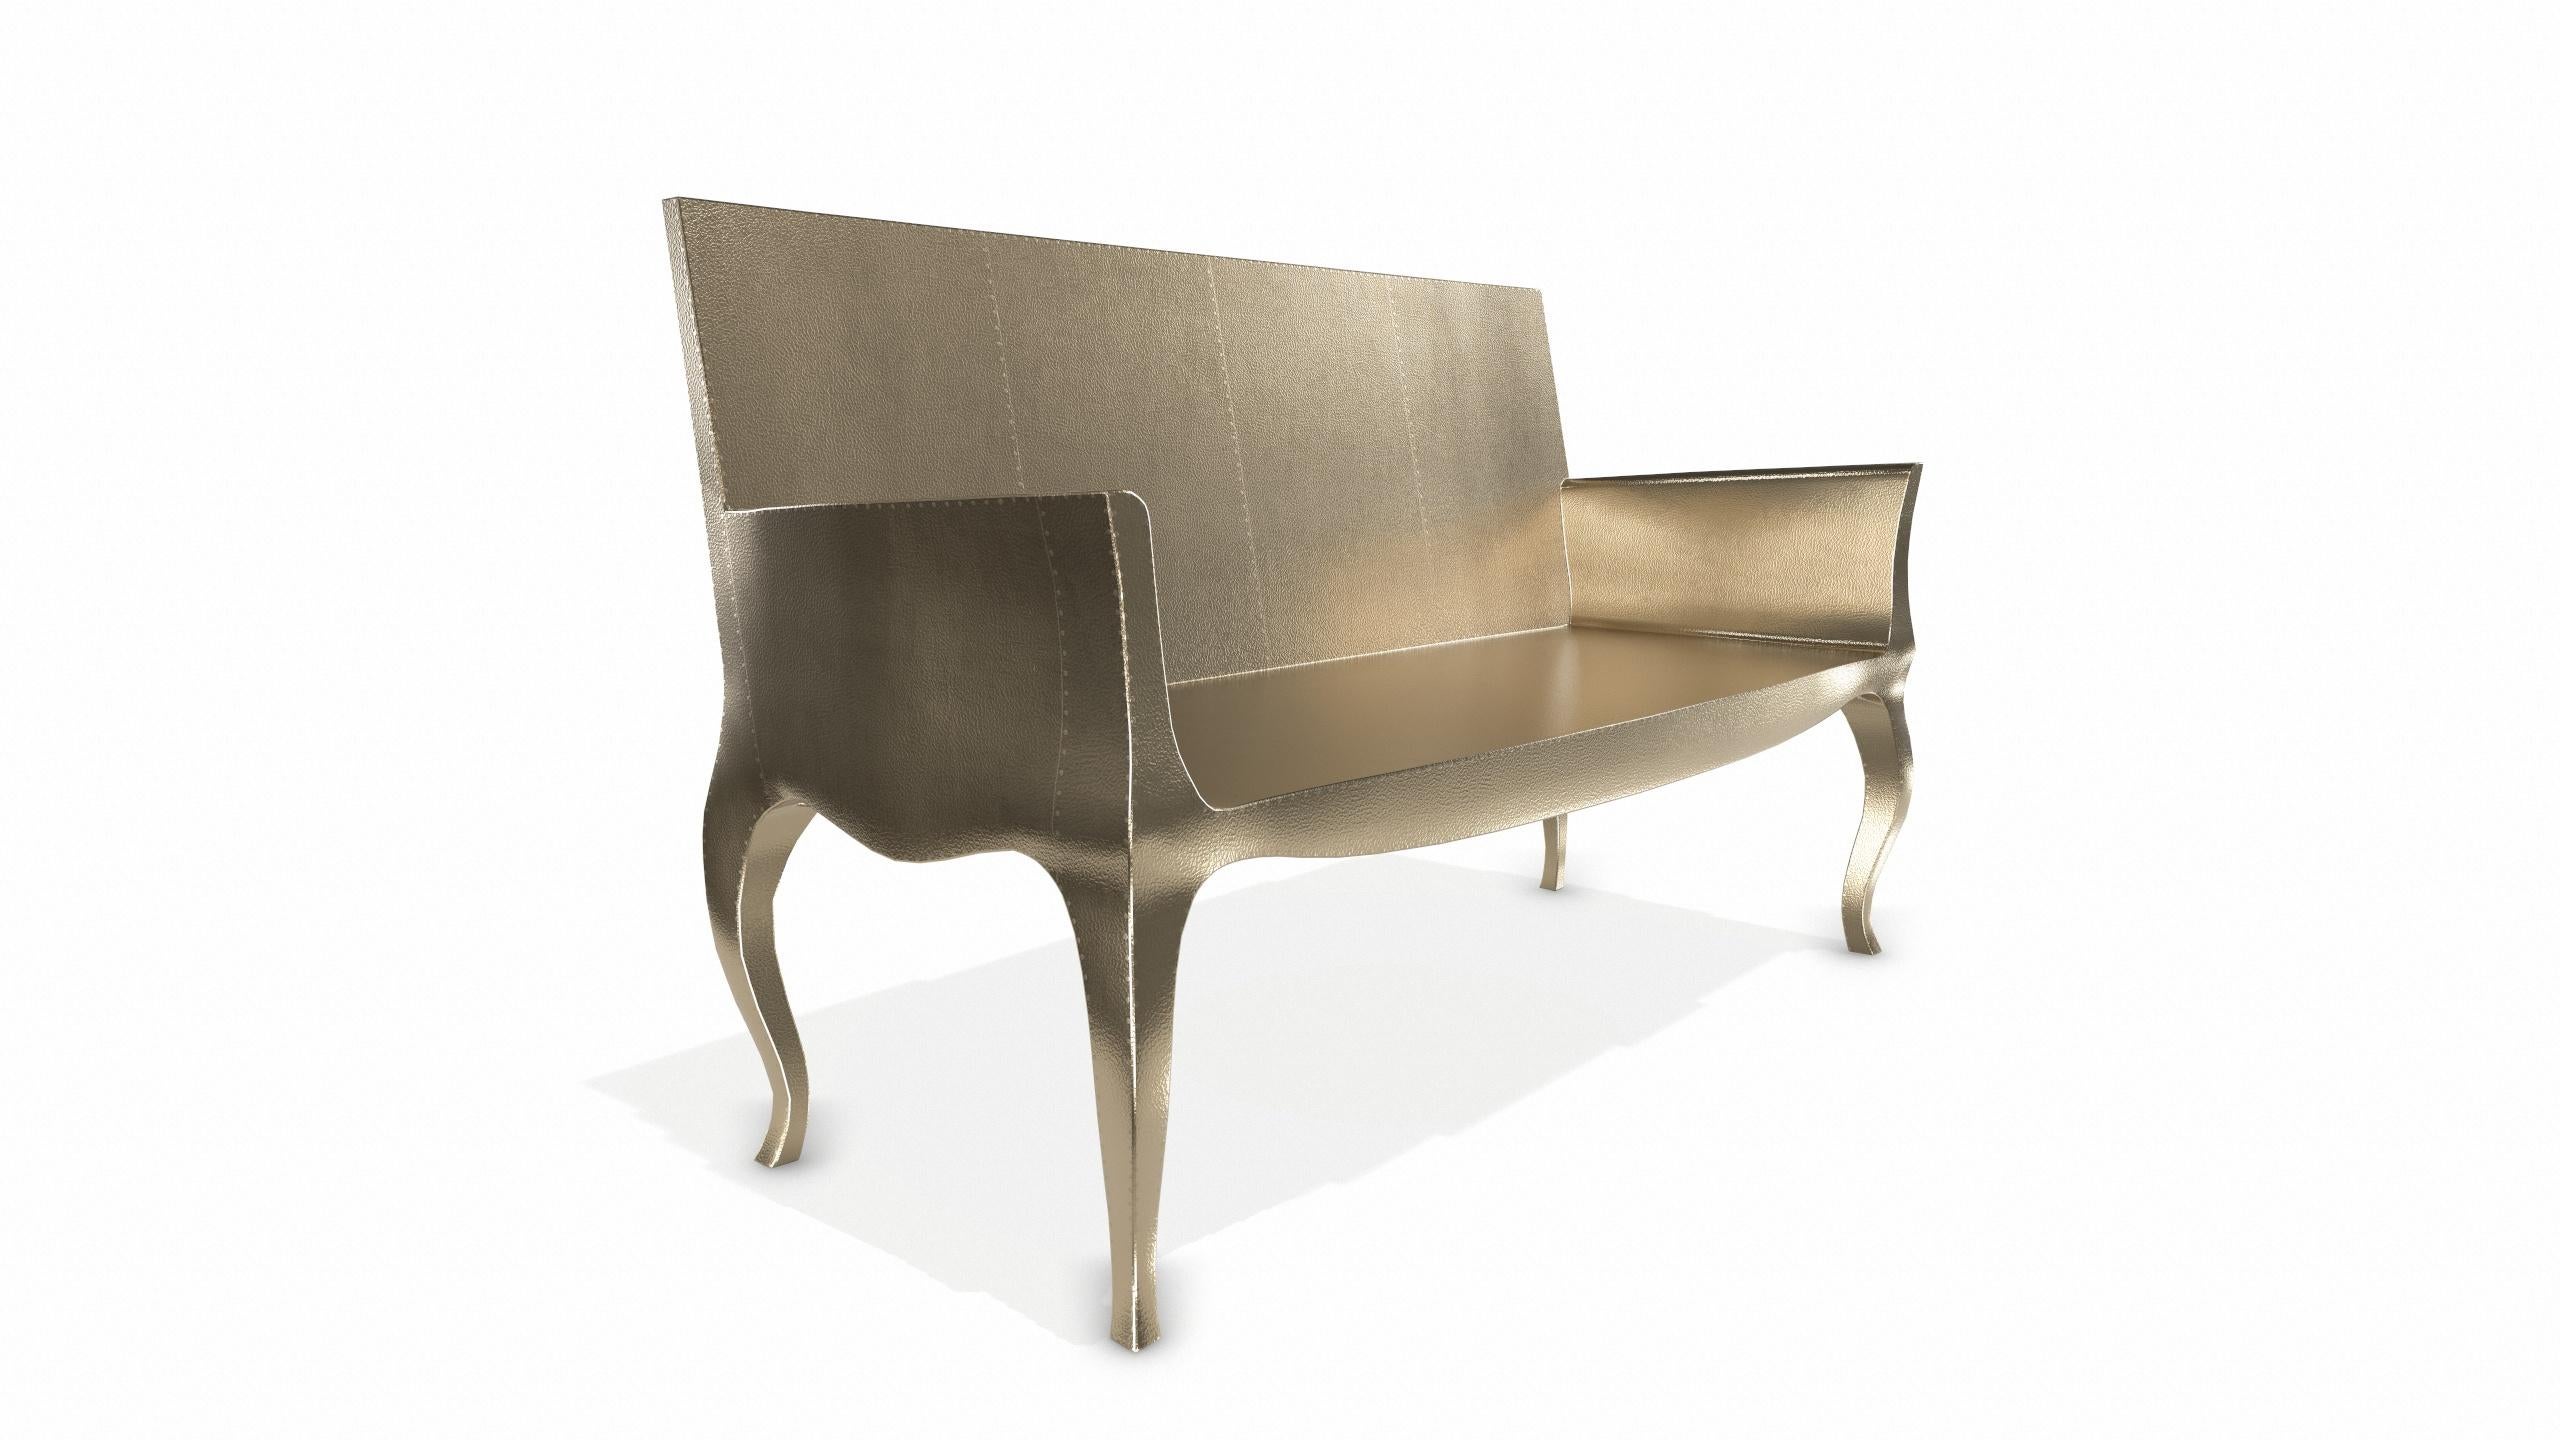 Louise Settee Art Deco Chaise Longues in Fine Hammered Brass by Paul Mathieu In New Condition For Sale In New York, NY